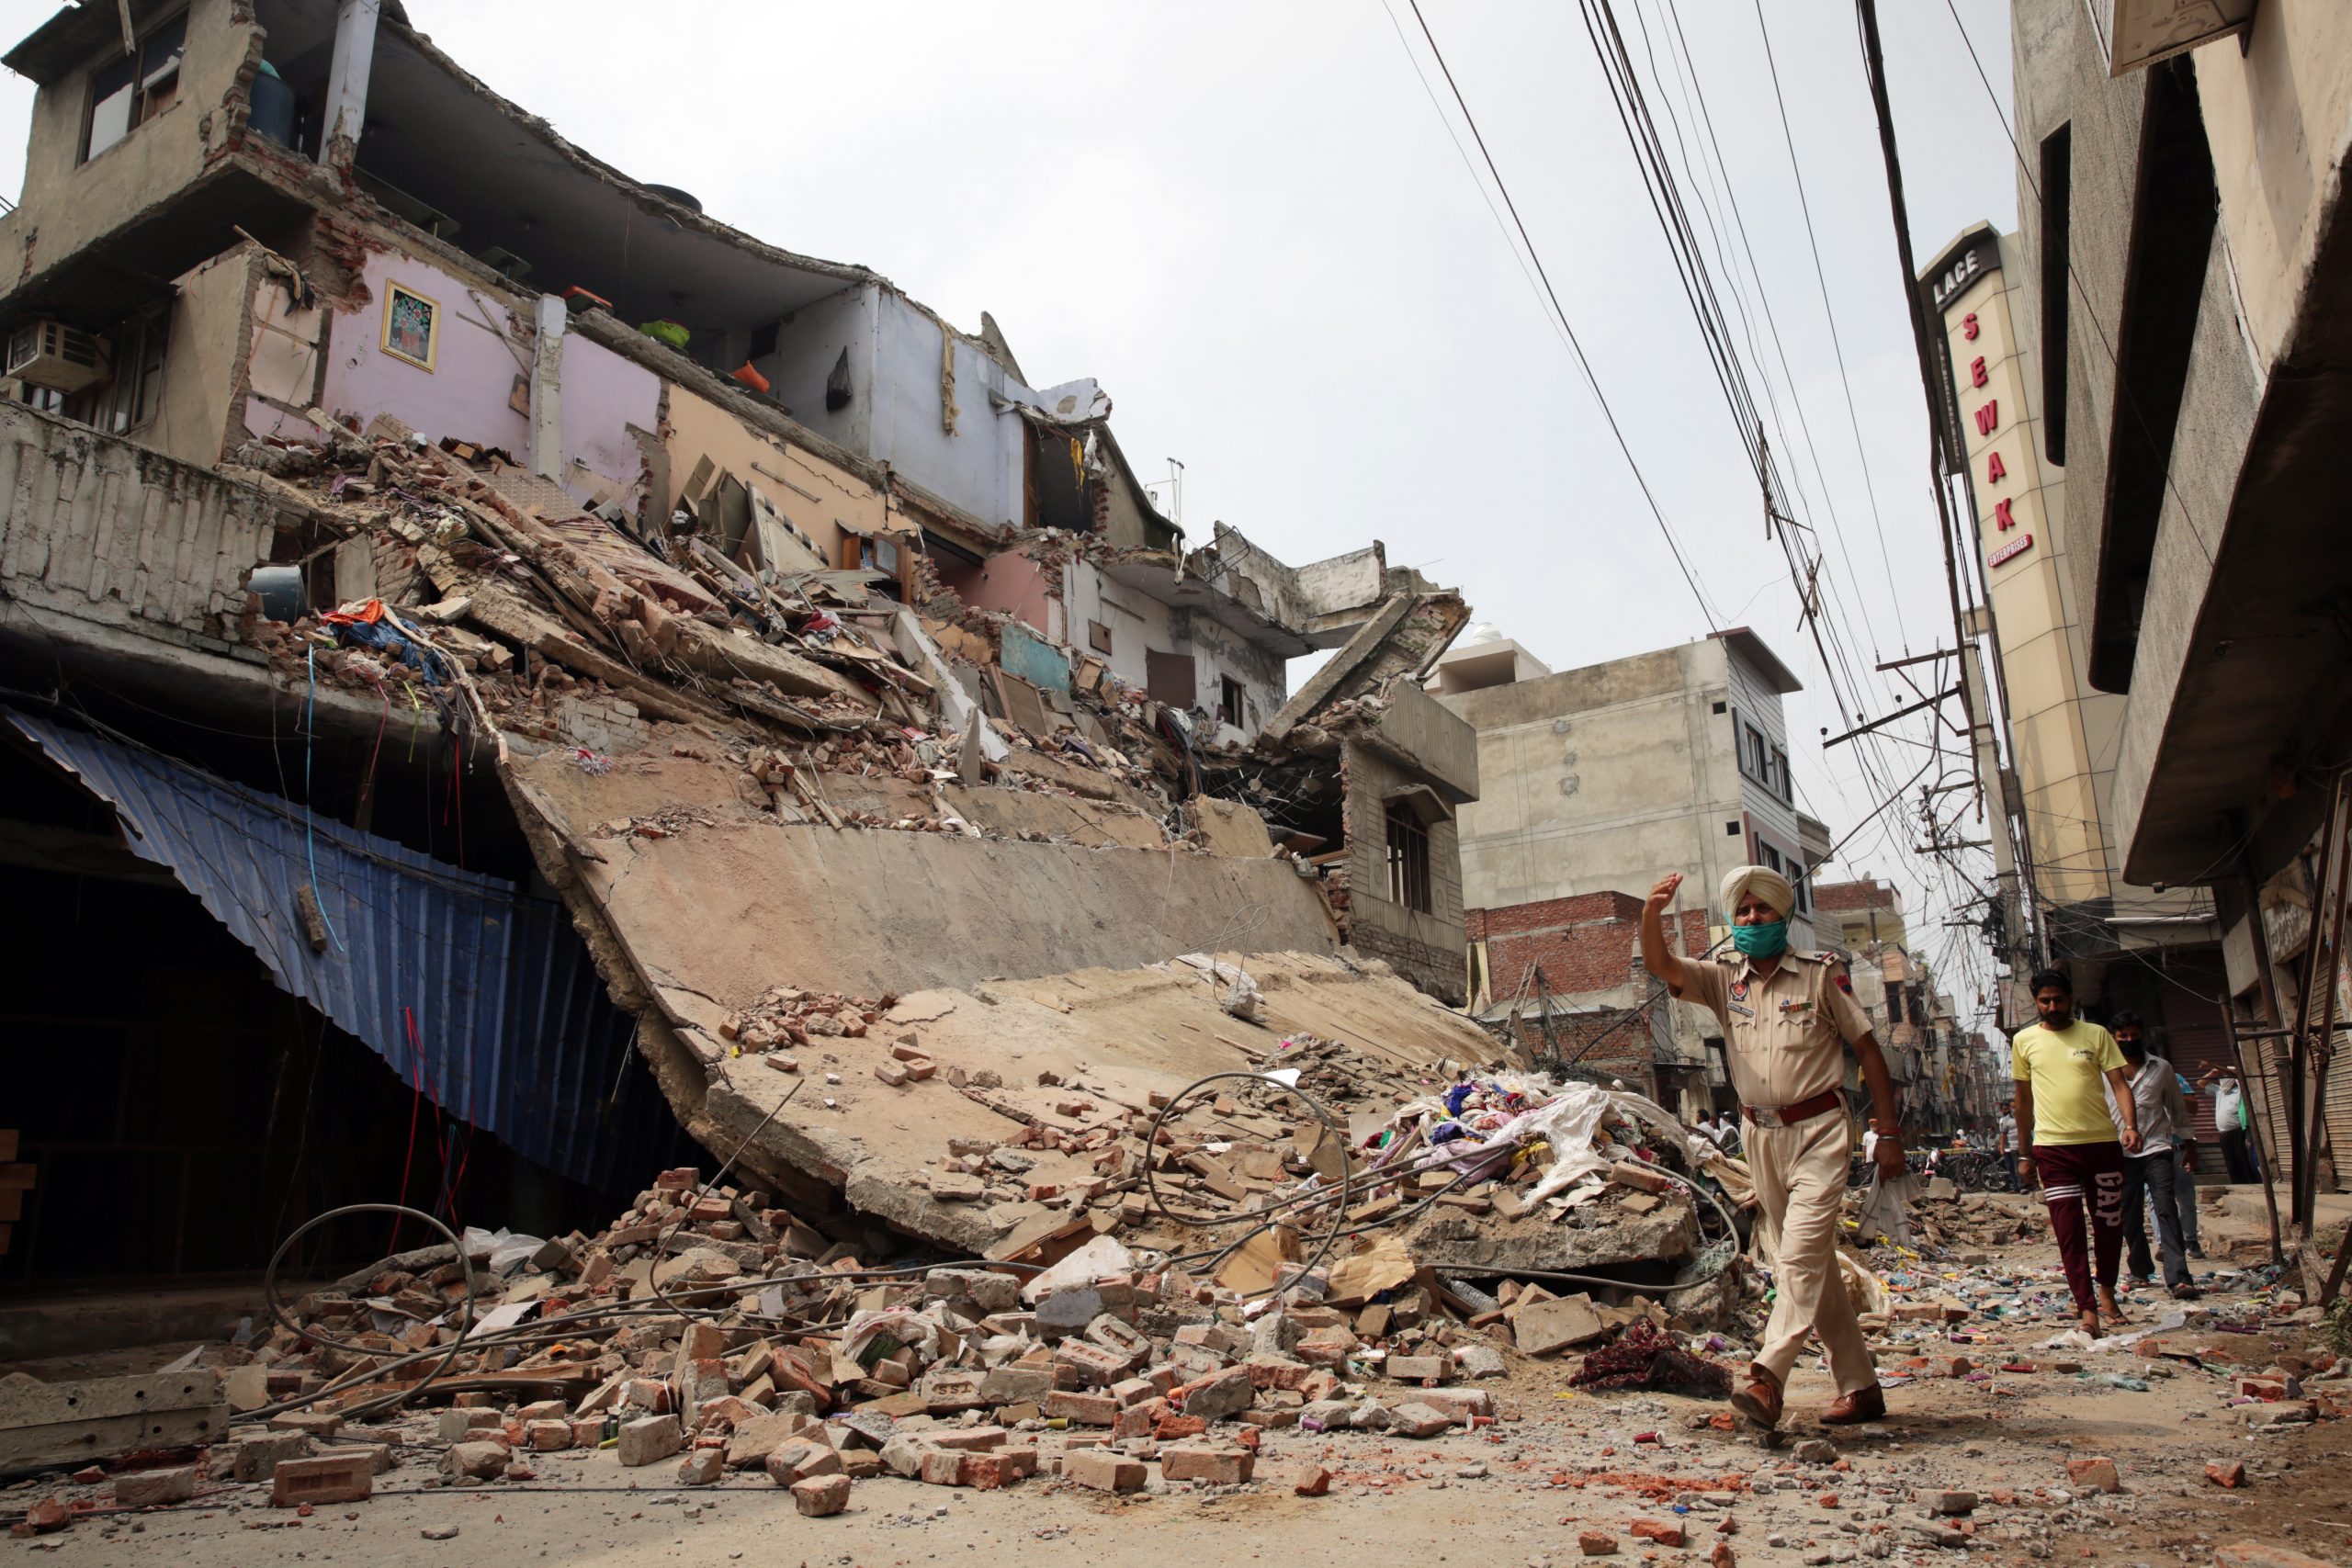 epa08596707 View of a collapsed building in Amritsar, India, 11 August 2020. No casualties were reported after the roof of a four-storey building of an embroidery factory collapsed on the night of 10 August.  EPA/RAMINDER PAL SINGH